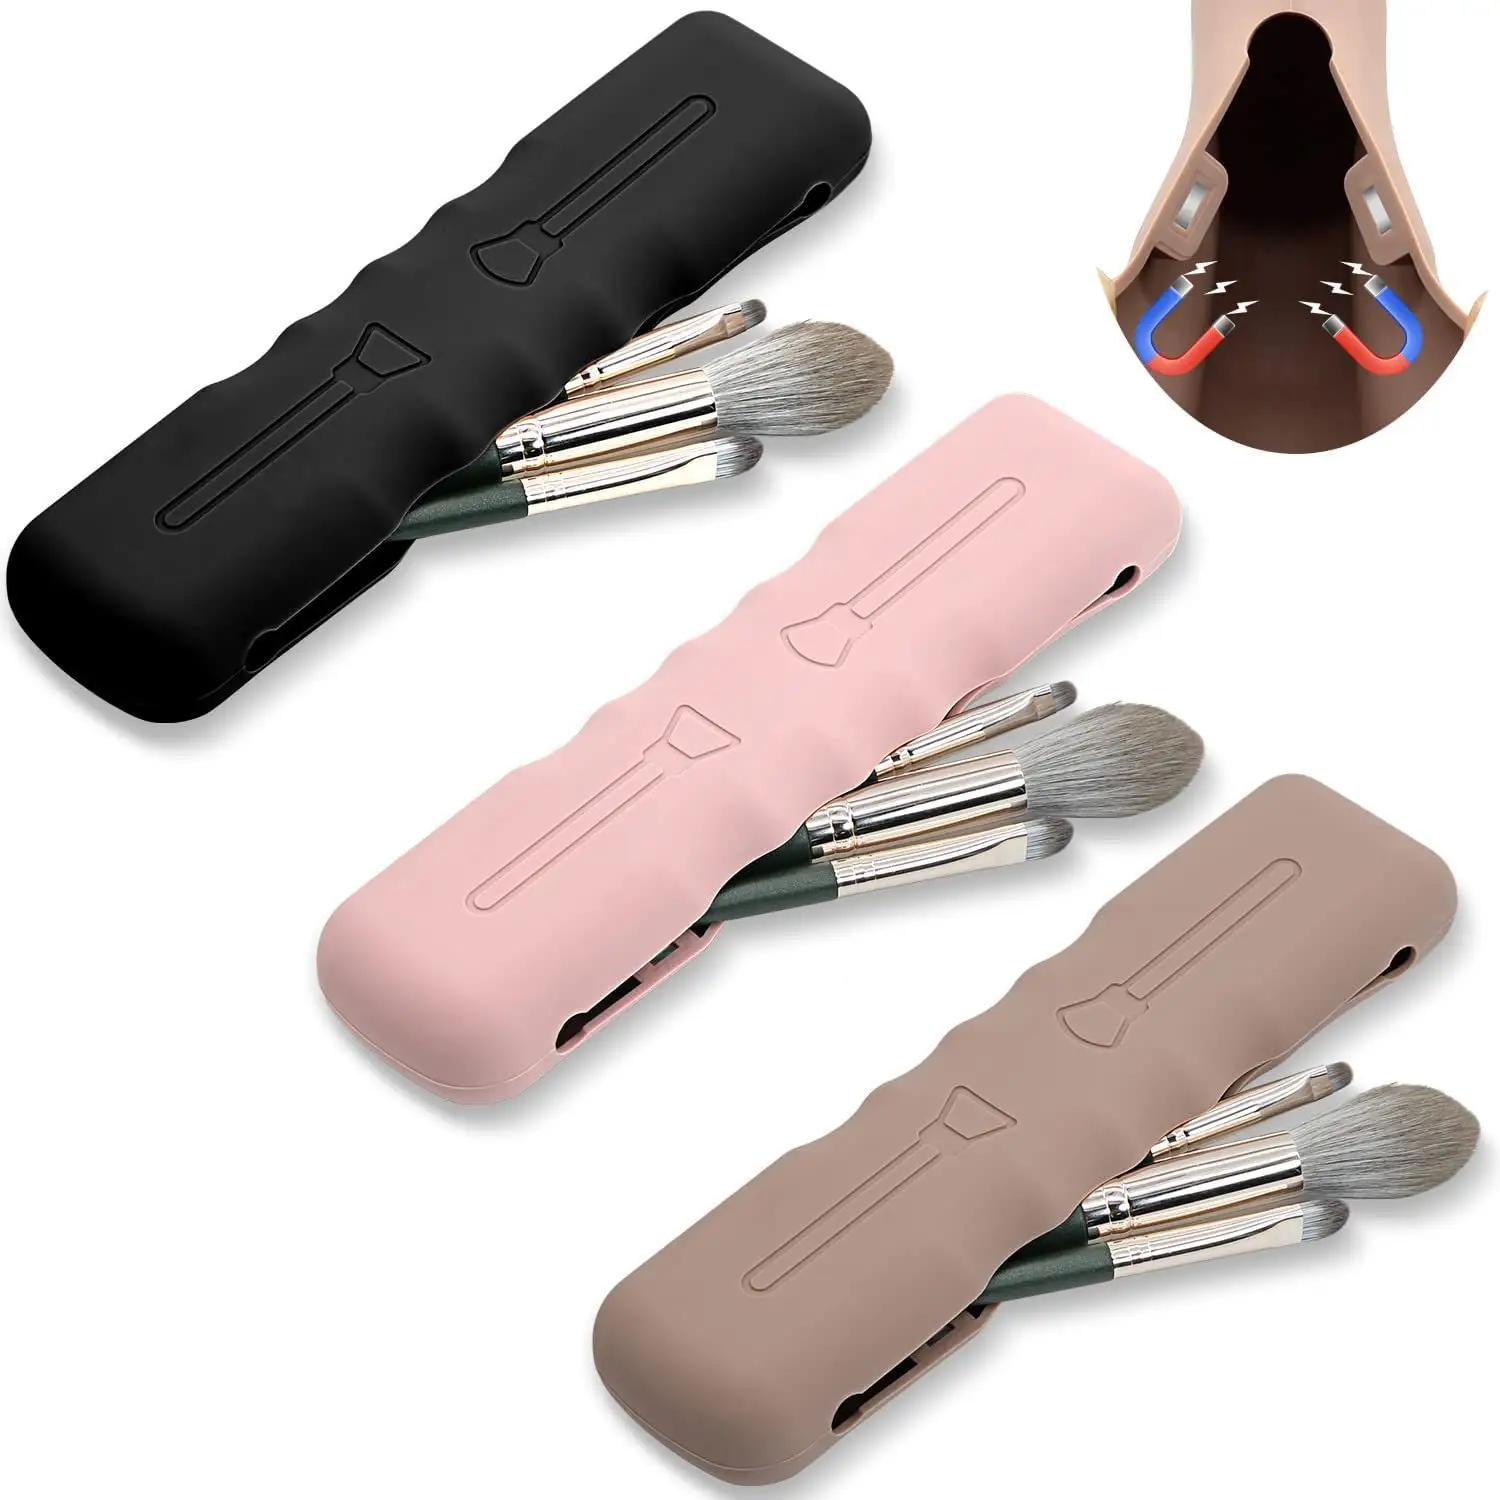 Magnetic Closure Waterproof Makeup Brushes Cute Soft Portable Cosmetic Brushes Holders For Travel Silicone Makeup Brush Case Bag